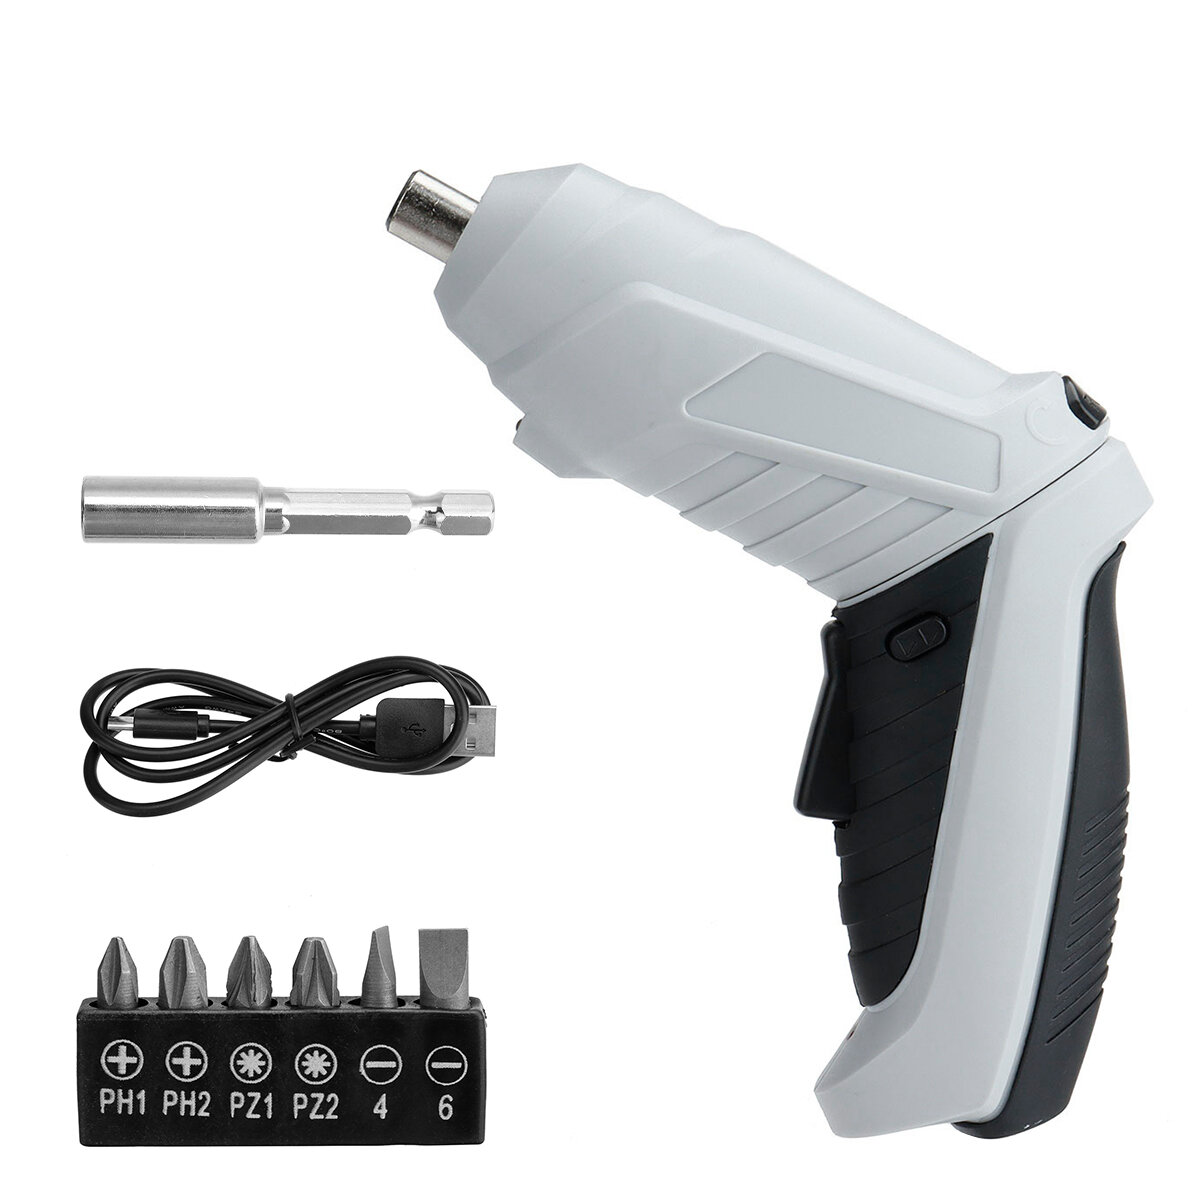 

Drillpro DC3.6V 3.5N.M 1.5AH 200rpm 90° Rotary Handle Electric Screwdriver with 6 Screwdriver Bits